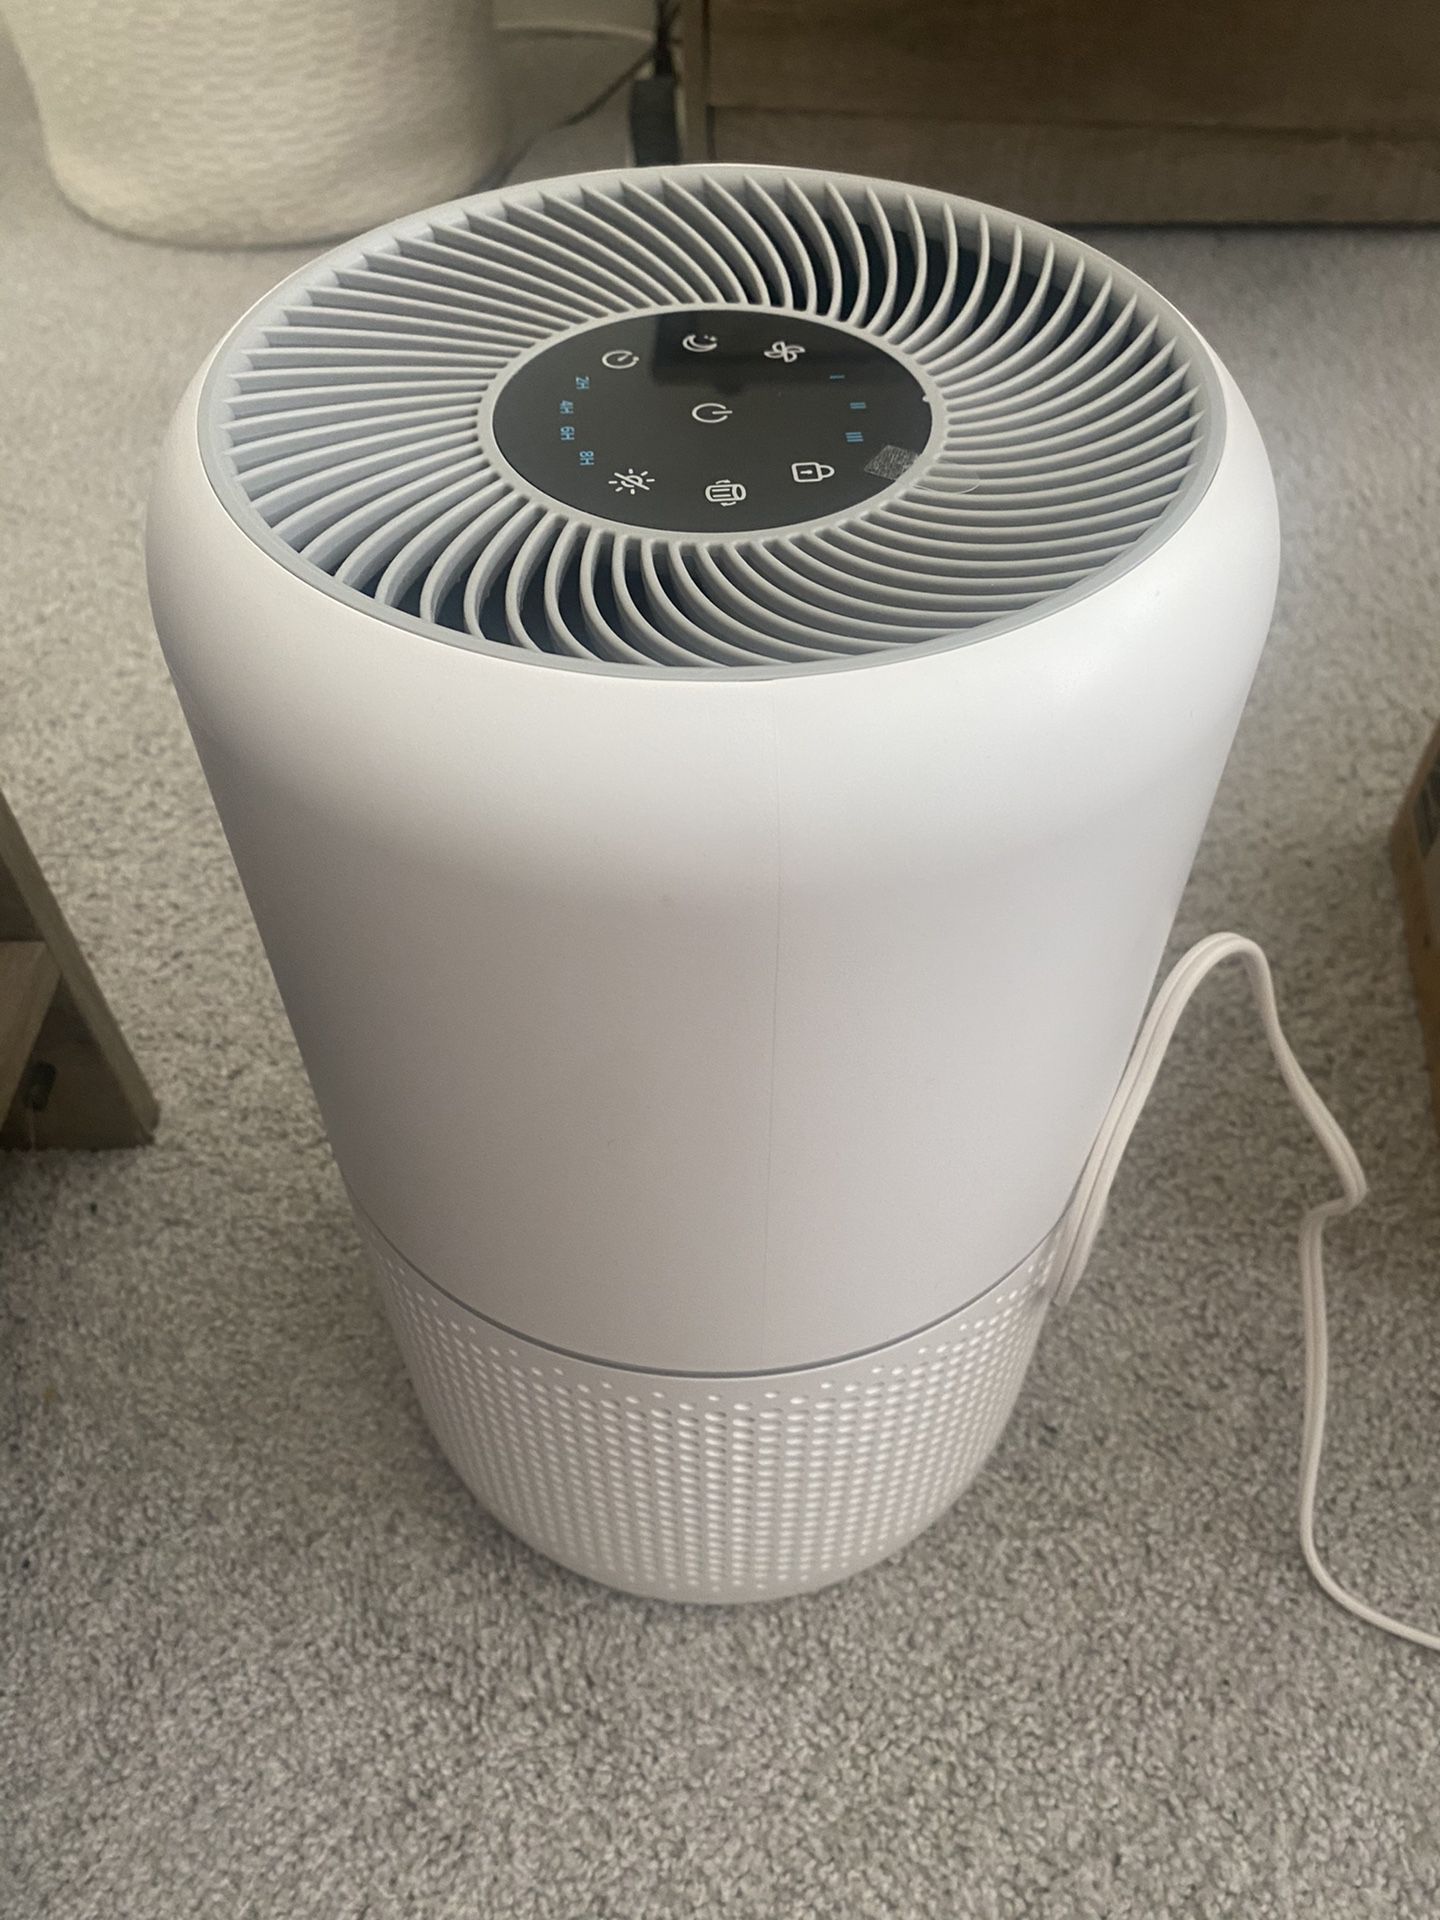 Levoit LV-PUR131 True Hepa Air Purifier for Sale in Fresno, CA - OfferUp